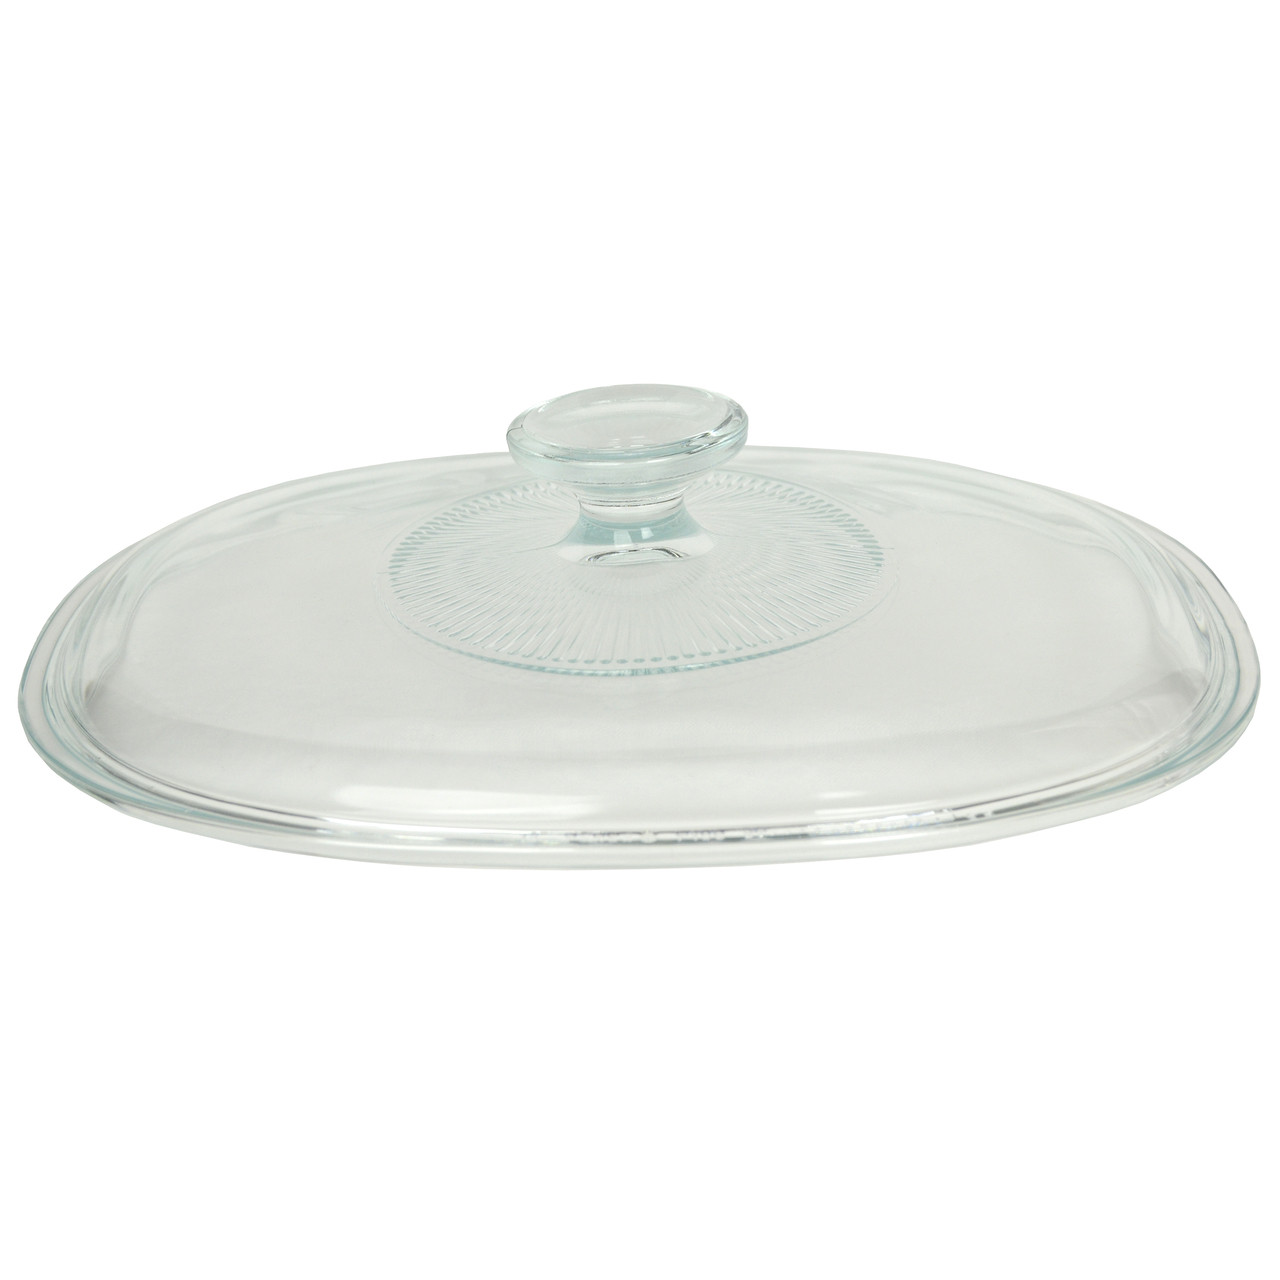 Glass Casserole Baking Dish with Cover, 12 x 7.5